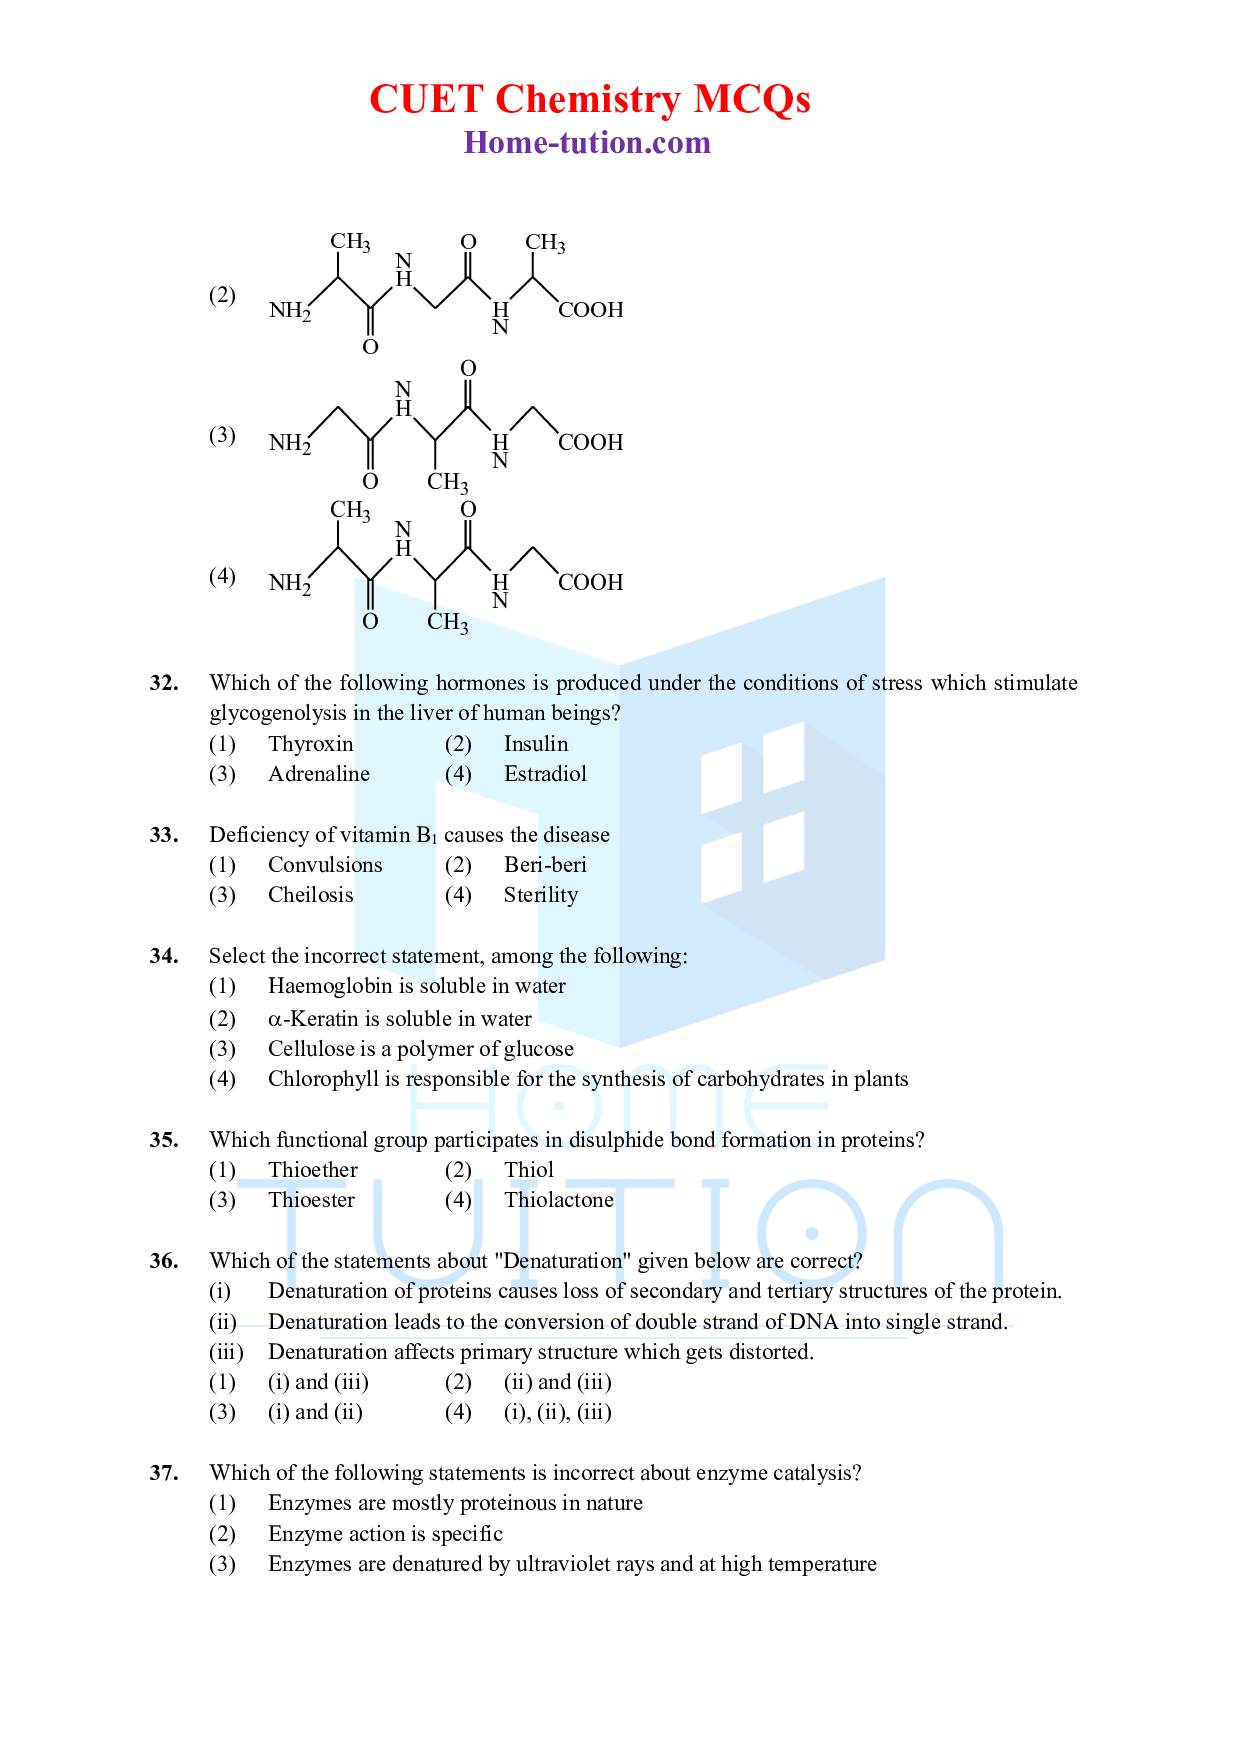 CUET MCQ Questions For Chapter-14 Biomolecules